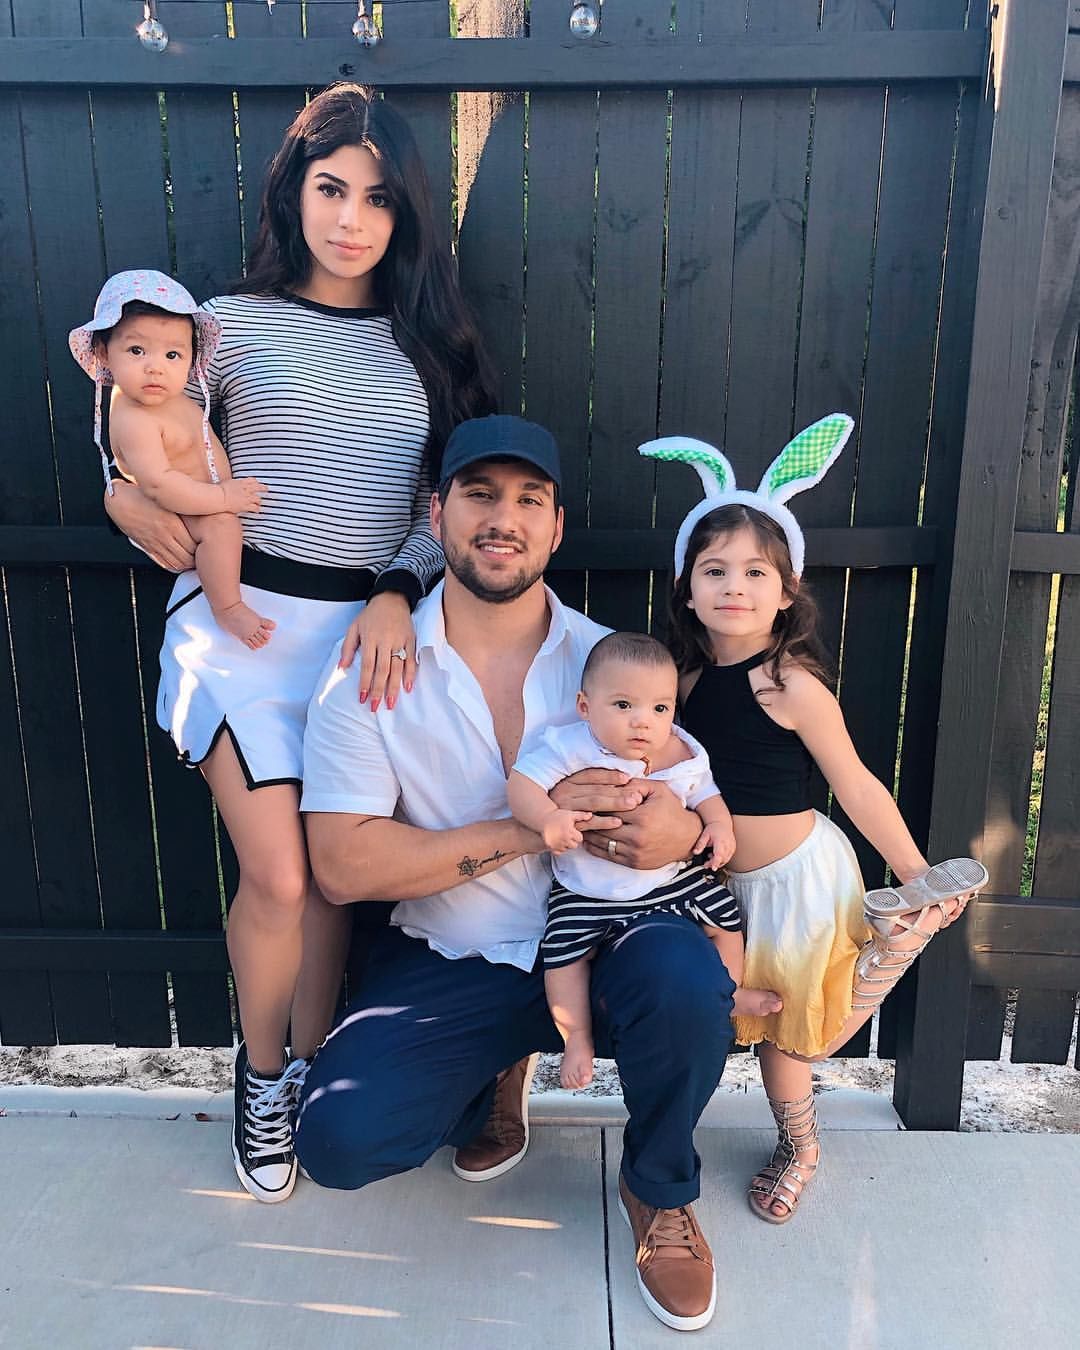 The talented YouTuber, Juliette with her husband and three children.